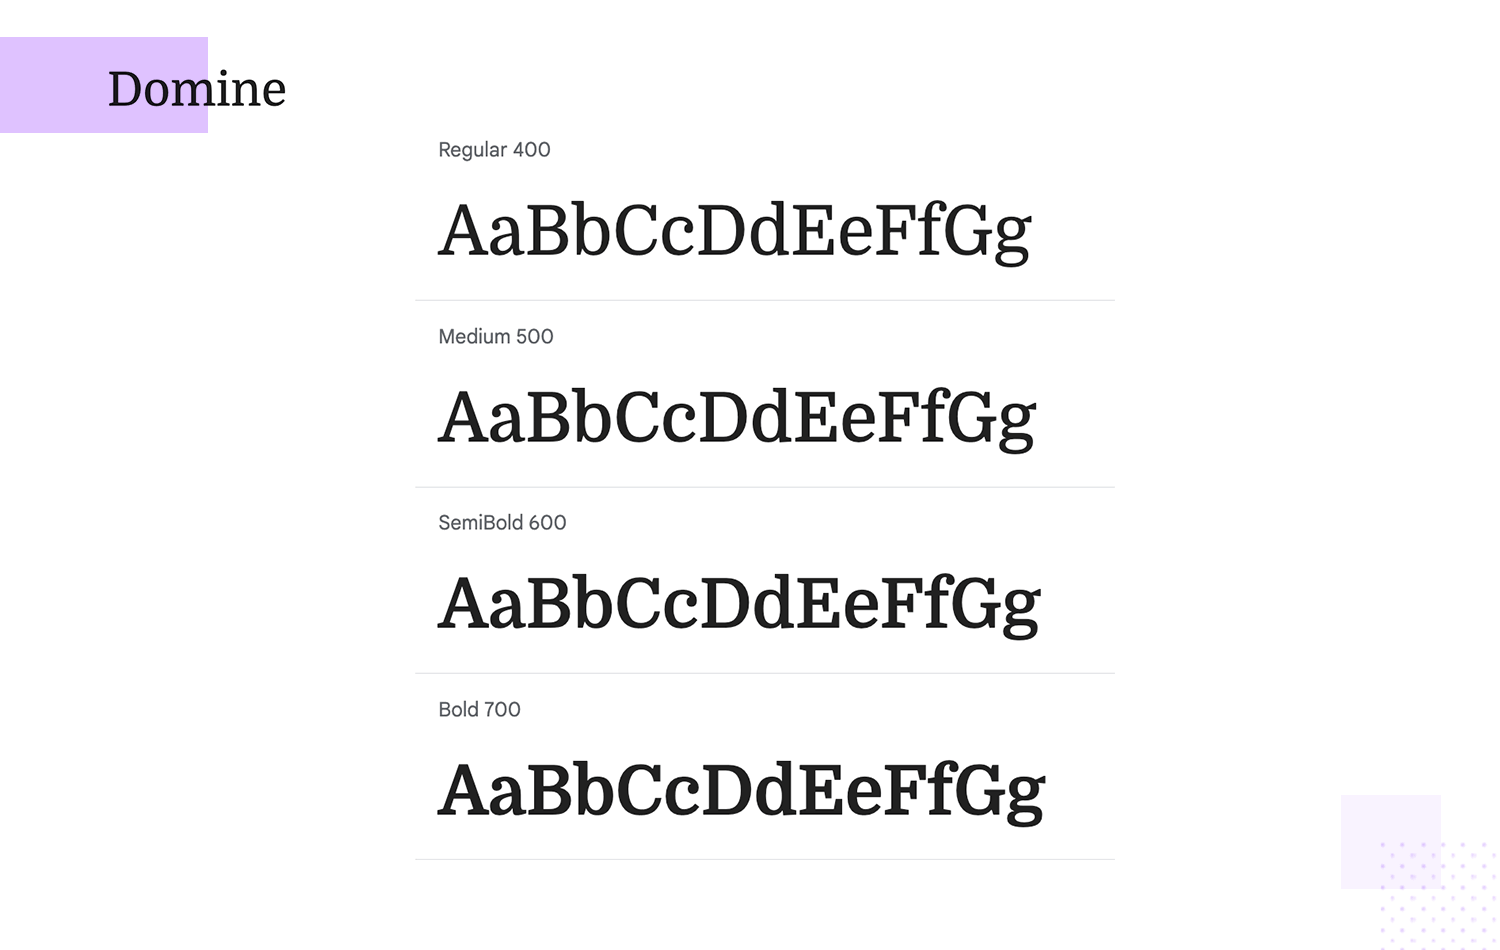 Domine font showcase with weights from Regular 400 to Bold 700.